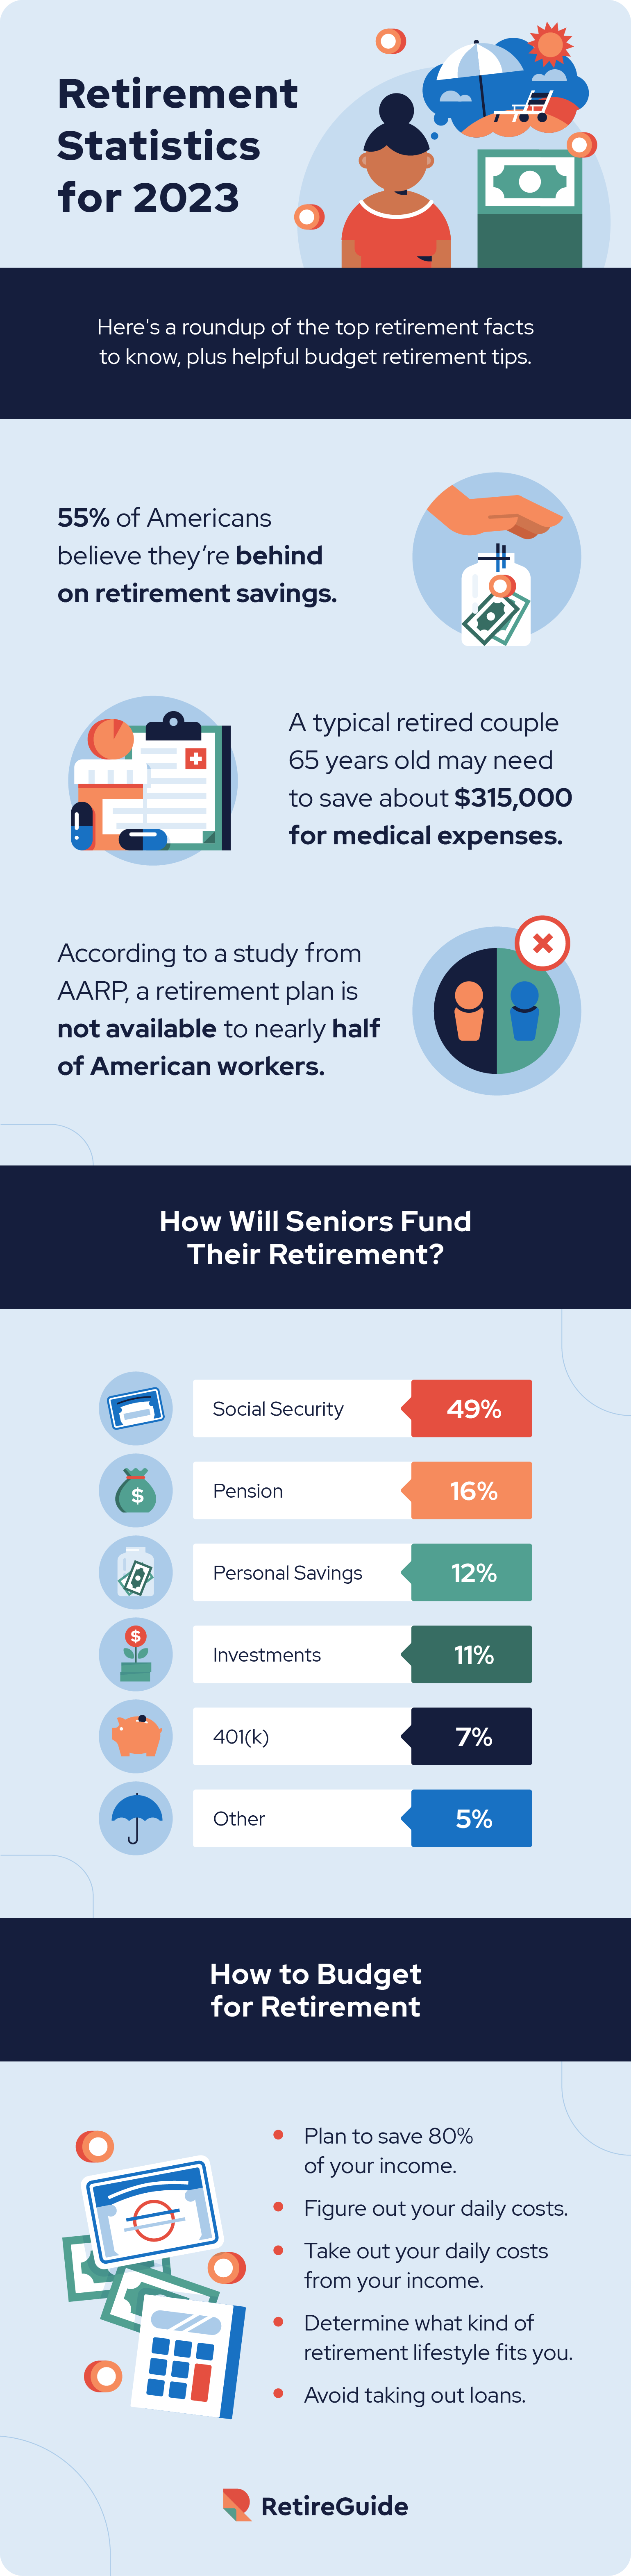 U.S. Retirees' Experience Differs From Nonretirees' Outlook